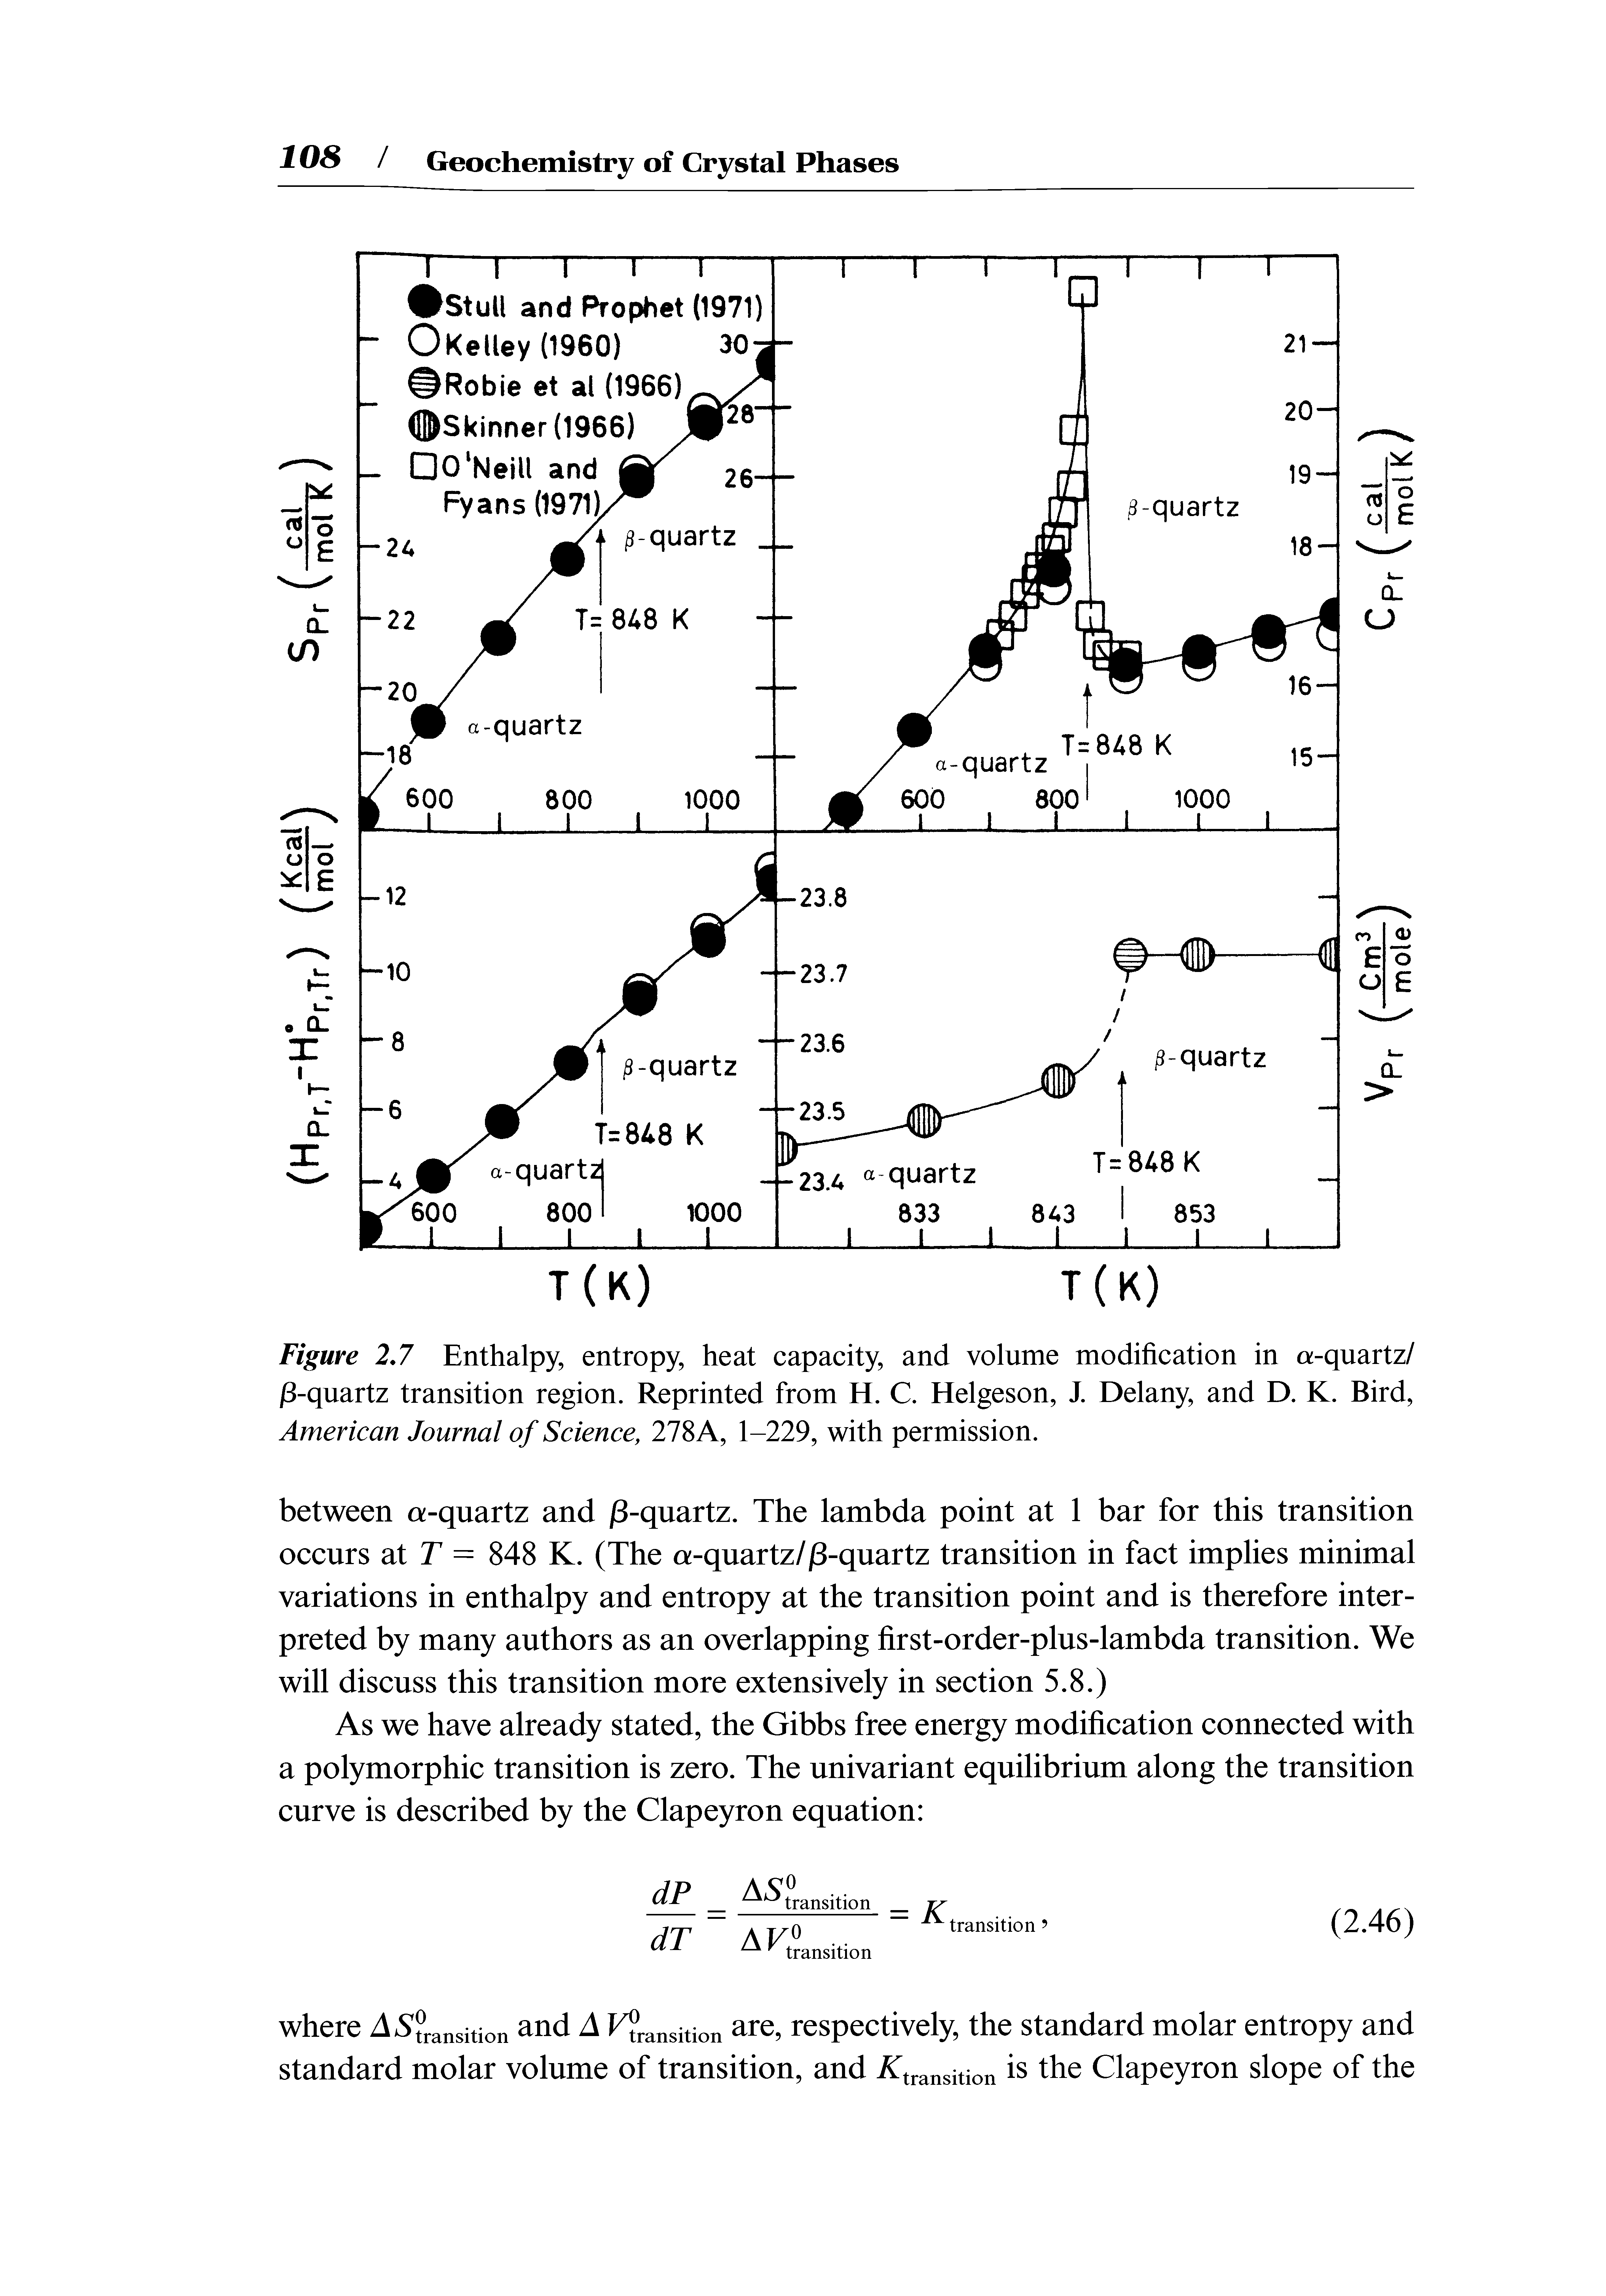 Figure 2J Enthalpy, entropy, heat capacity, and volume modification in a-quartz/ /3-quartz transition region. Reprinted from H. C. Helgeson, J. Delany, and D. K. Bird, American Journal of Science, 278A, 1-229, with permission.